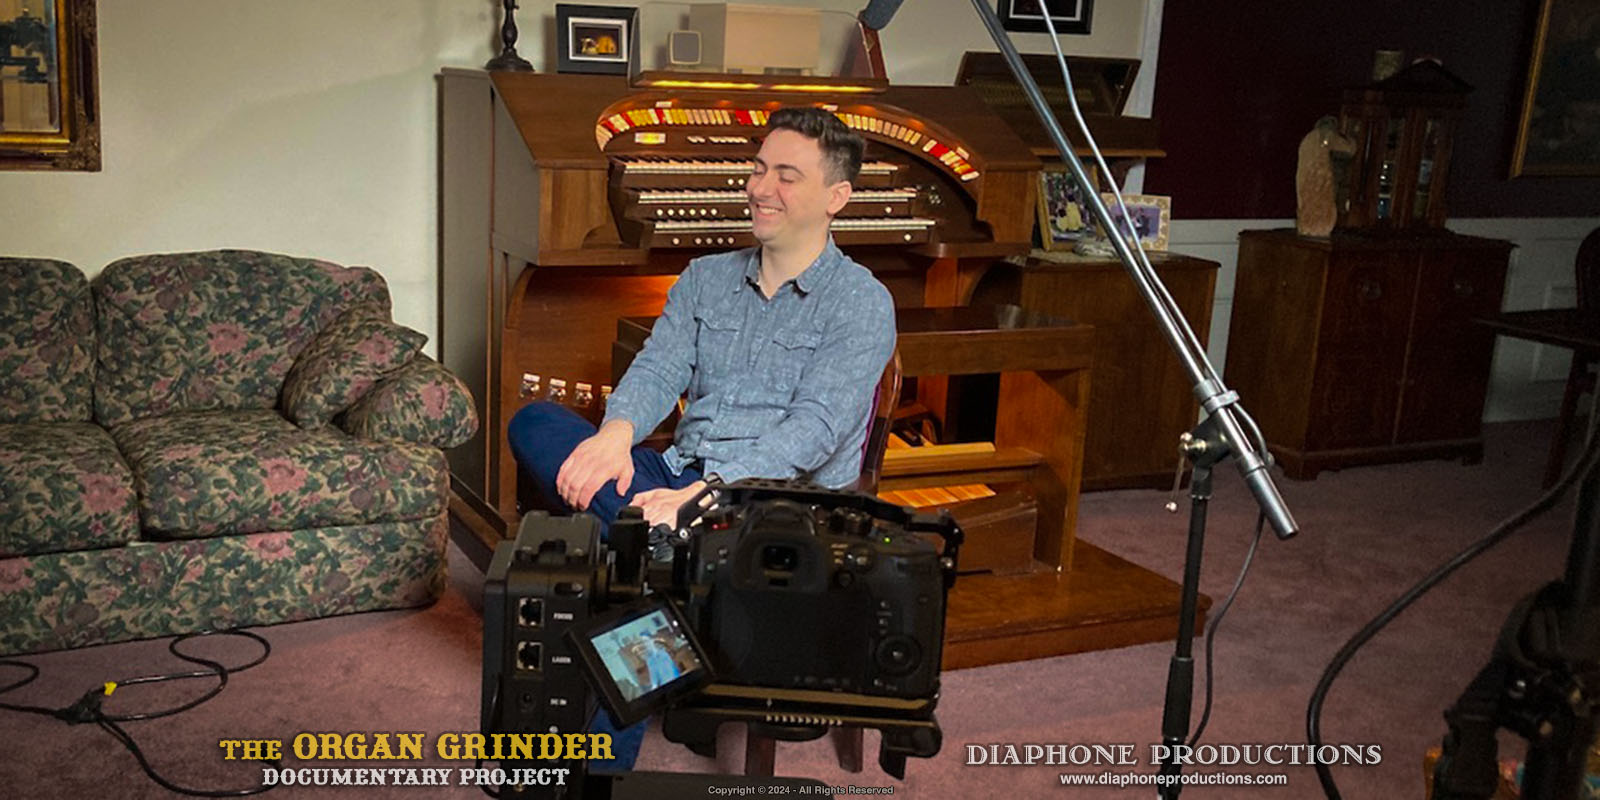 Nathan Avakian in front of the camera about to be interviewed. He is sitting in a small chair in his parent's living room, in front of his childhood practice organ console.